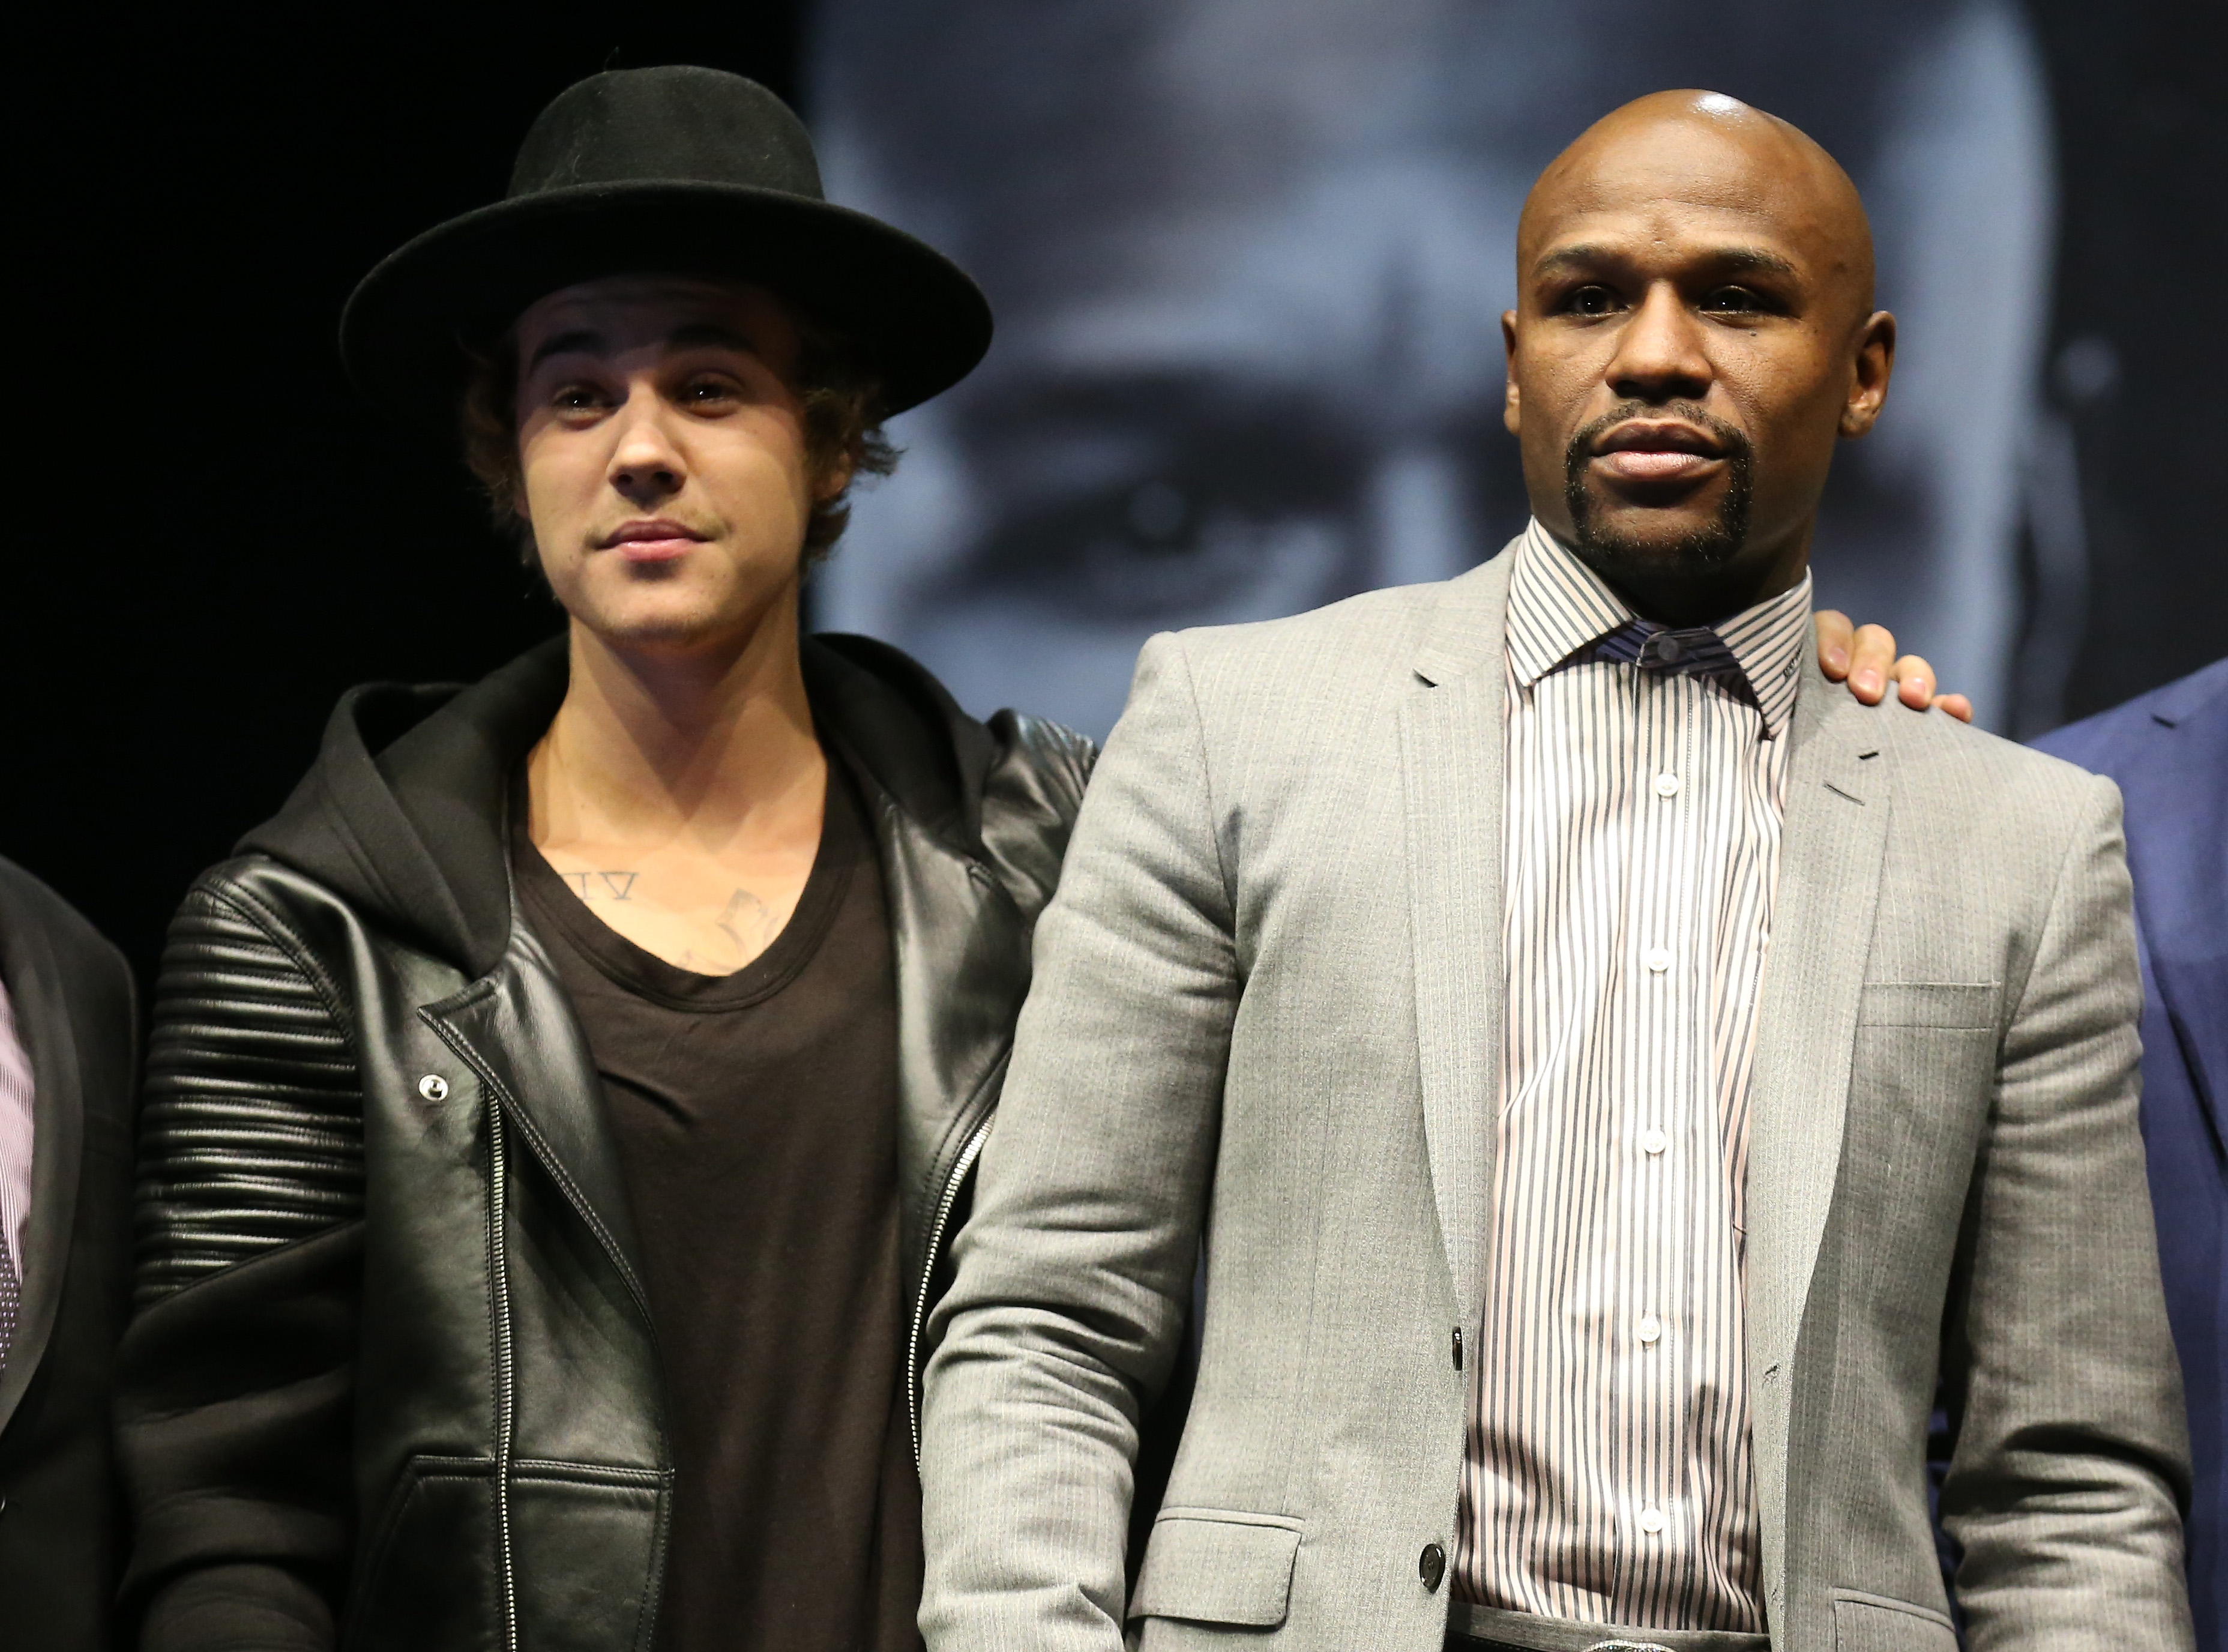 Floyd Mayweather v Manny Pacquiao - Press Conference